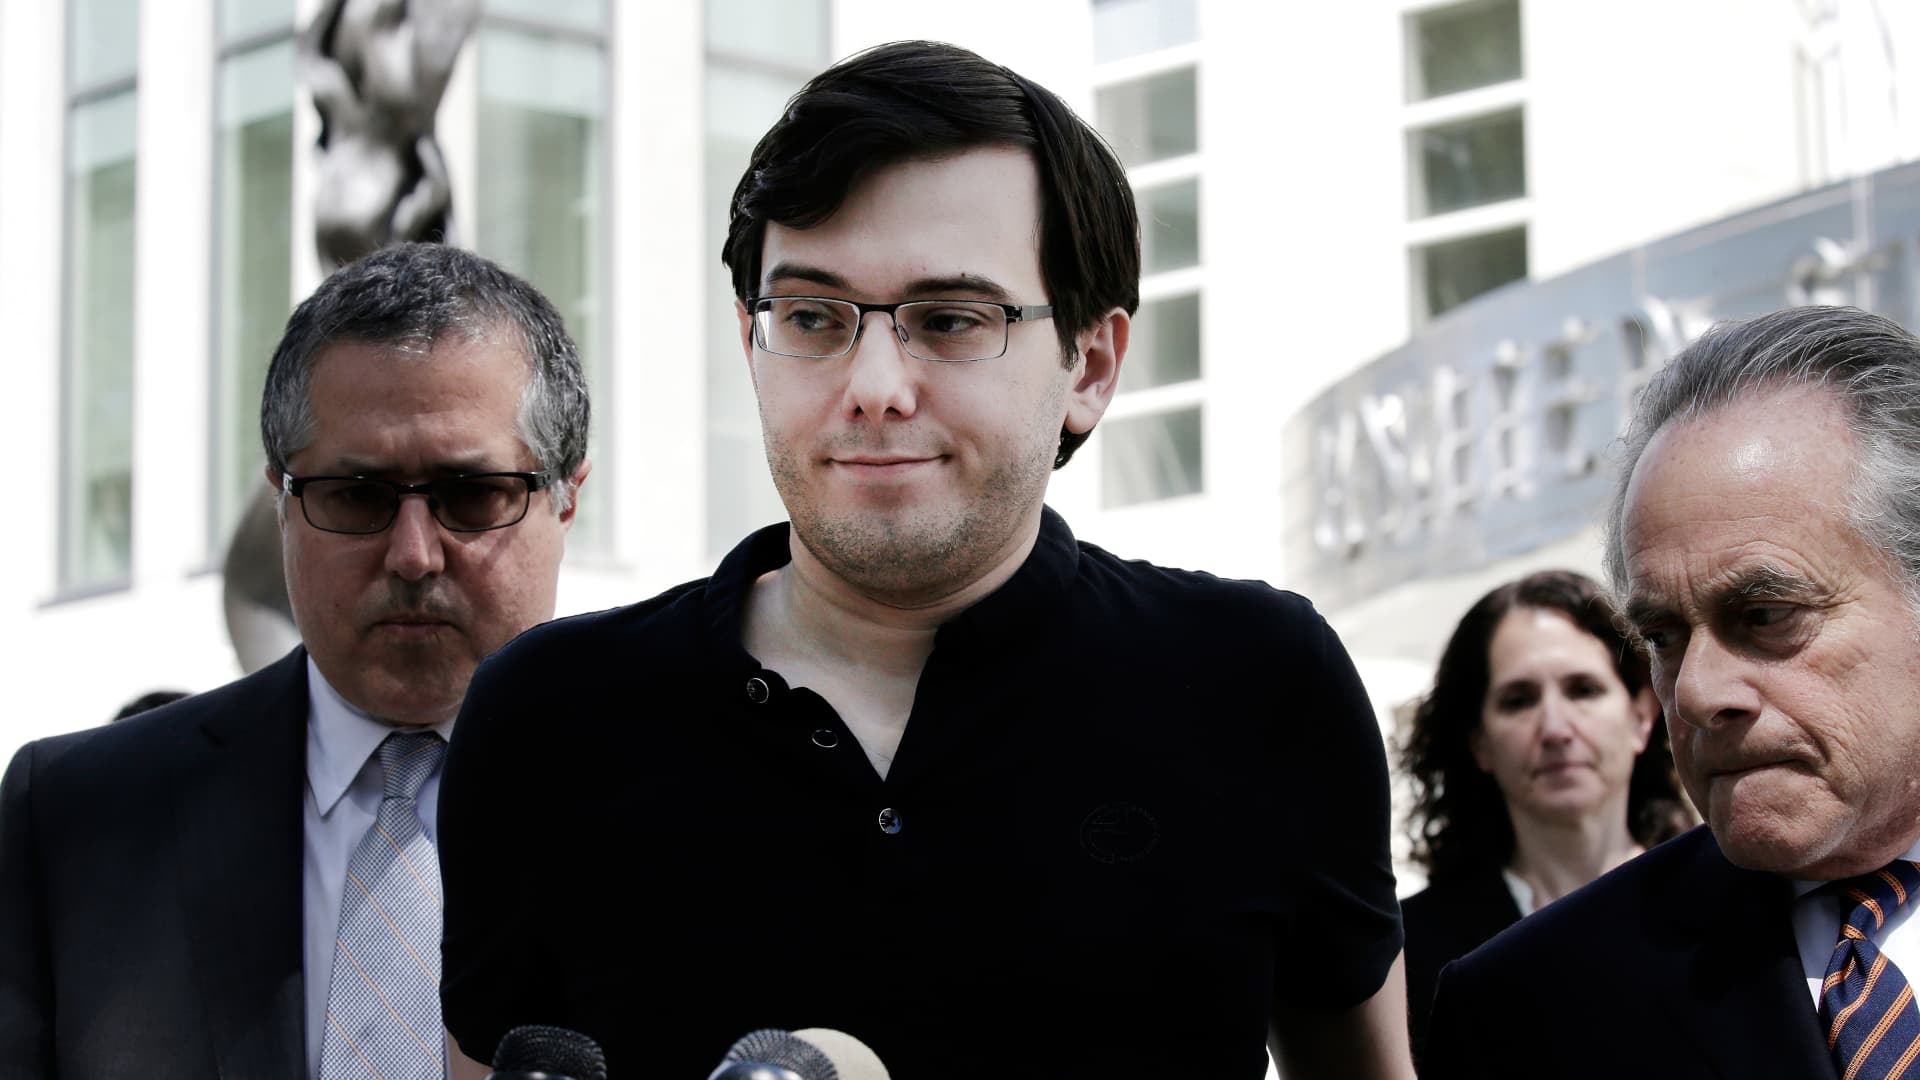 FTC asks judge to hold 'pharma bro' Martin Shkreli in contempt of court for forming new drug firm